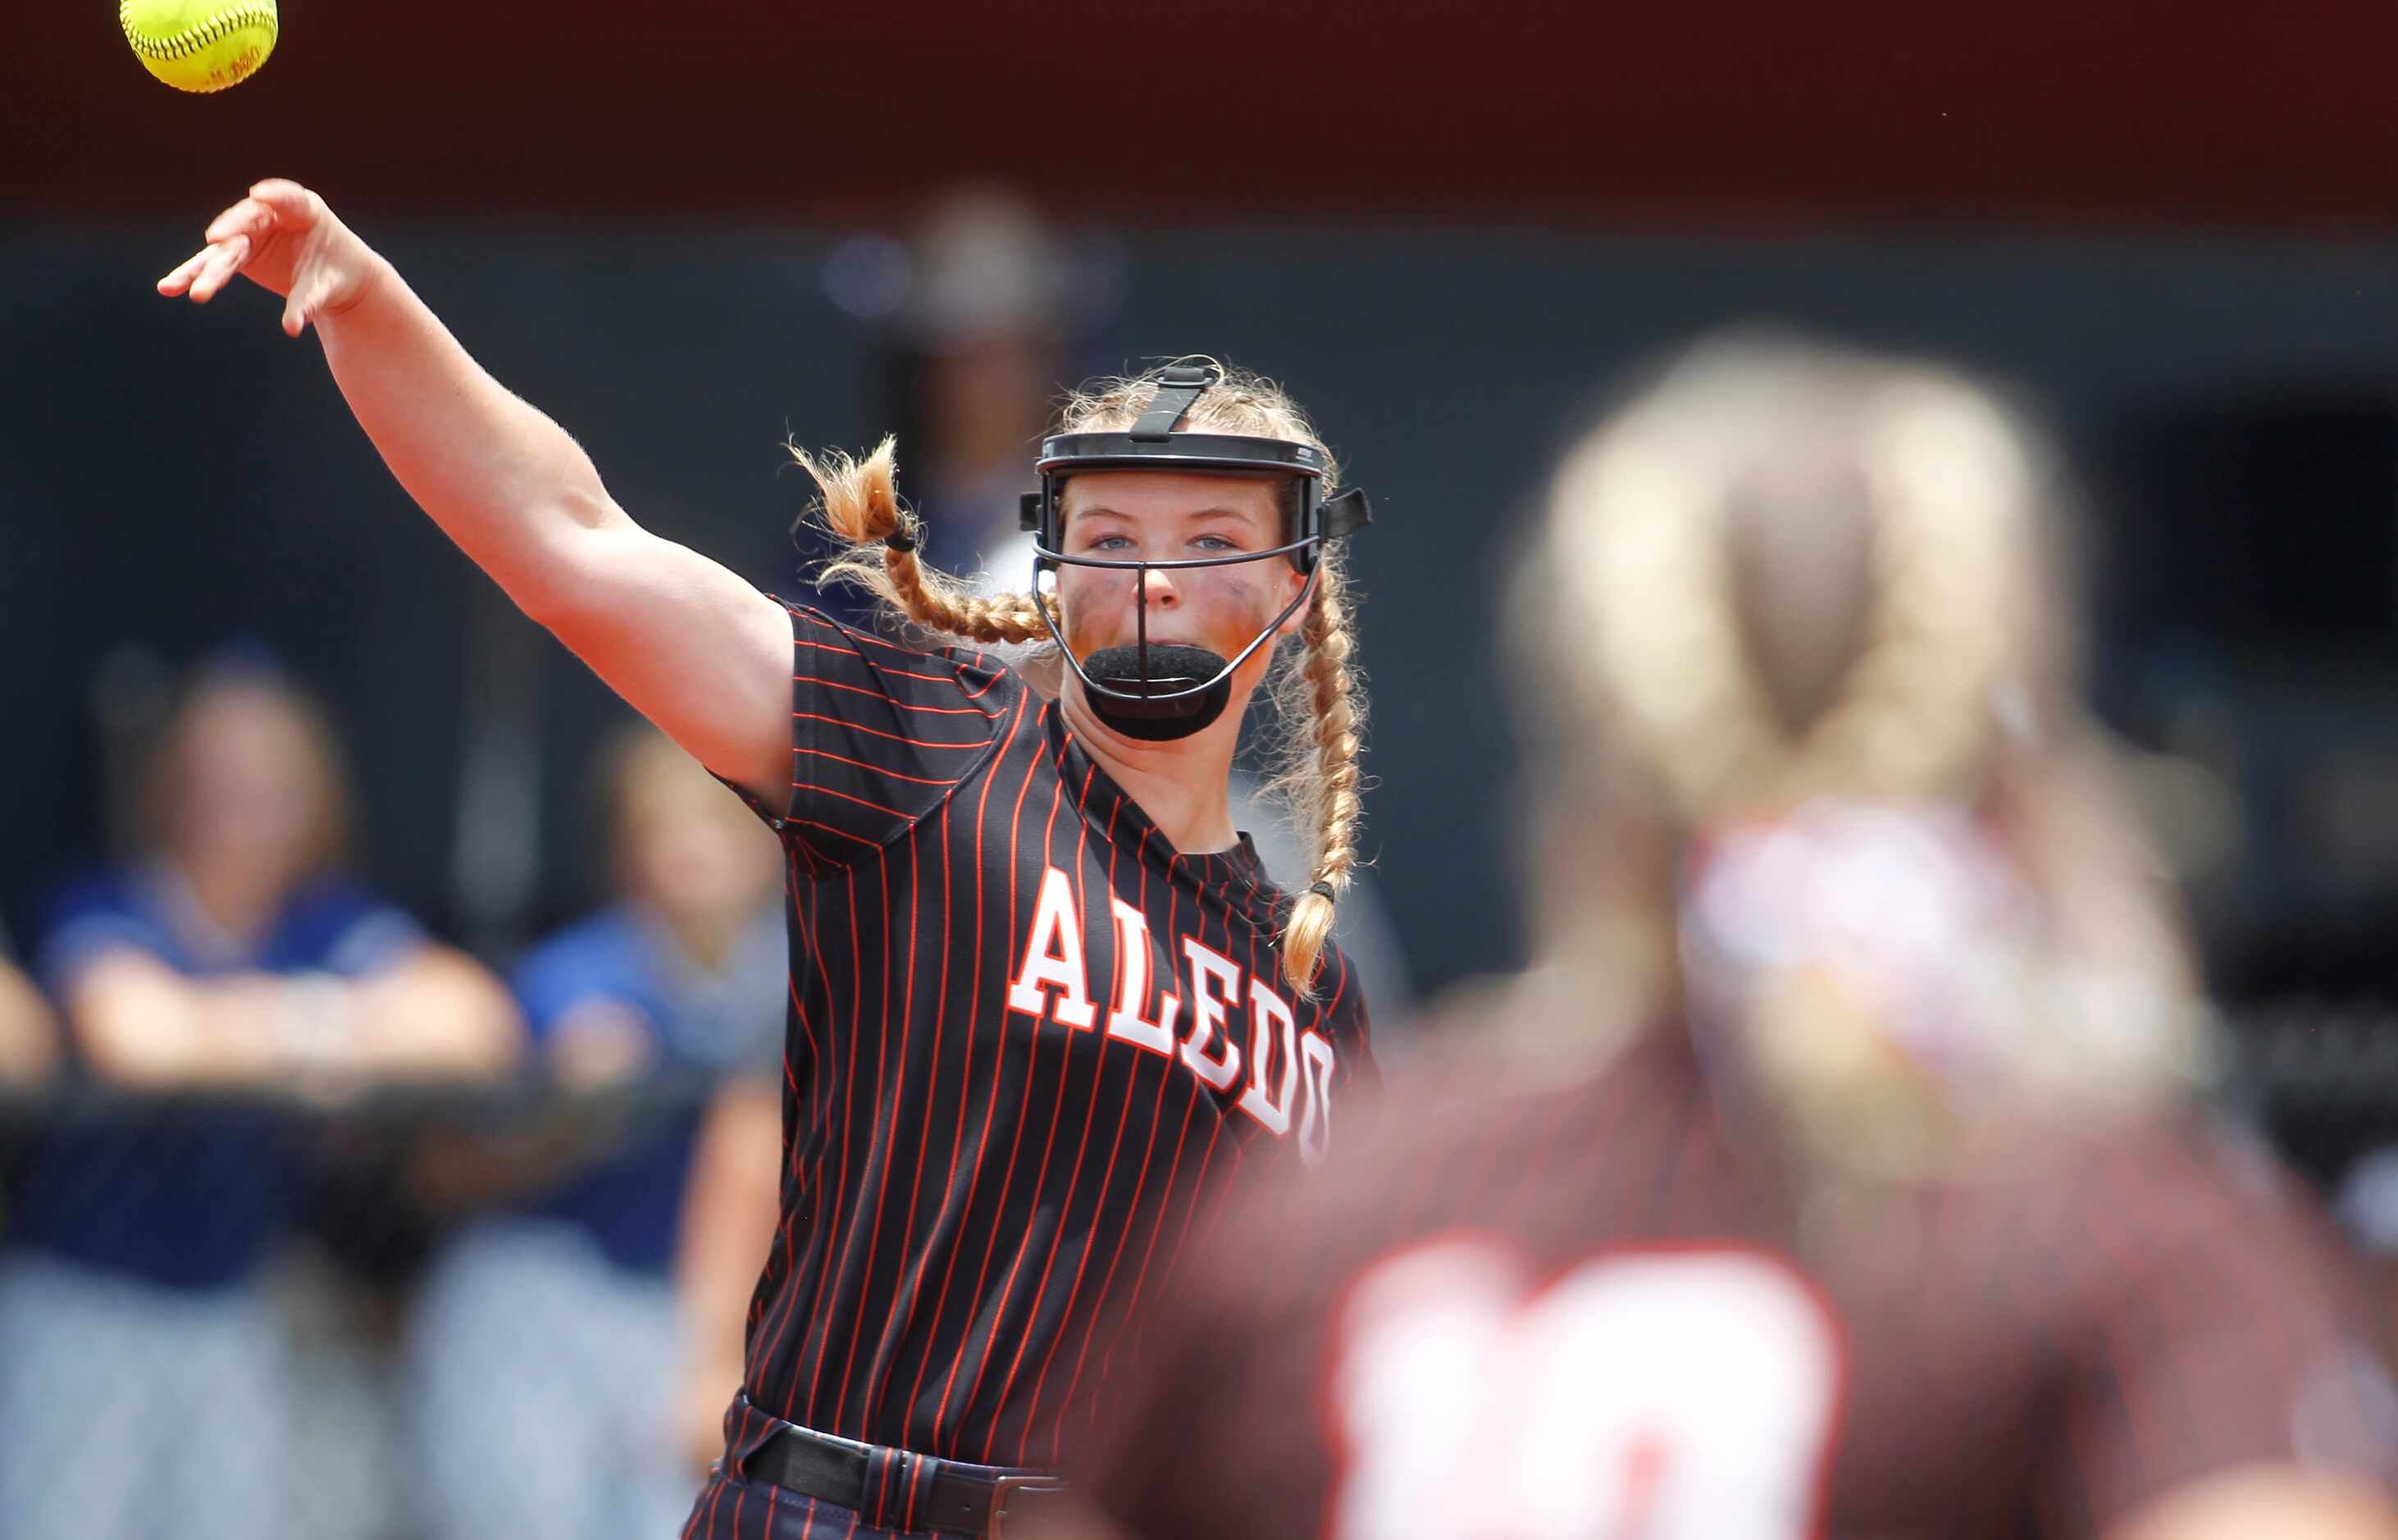 Aledo pitcher Kayleigh Smith (15) throws out a Georgetown batter after fielding a grounder...